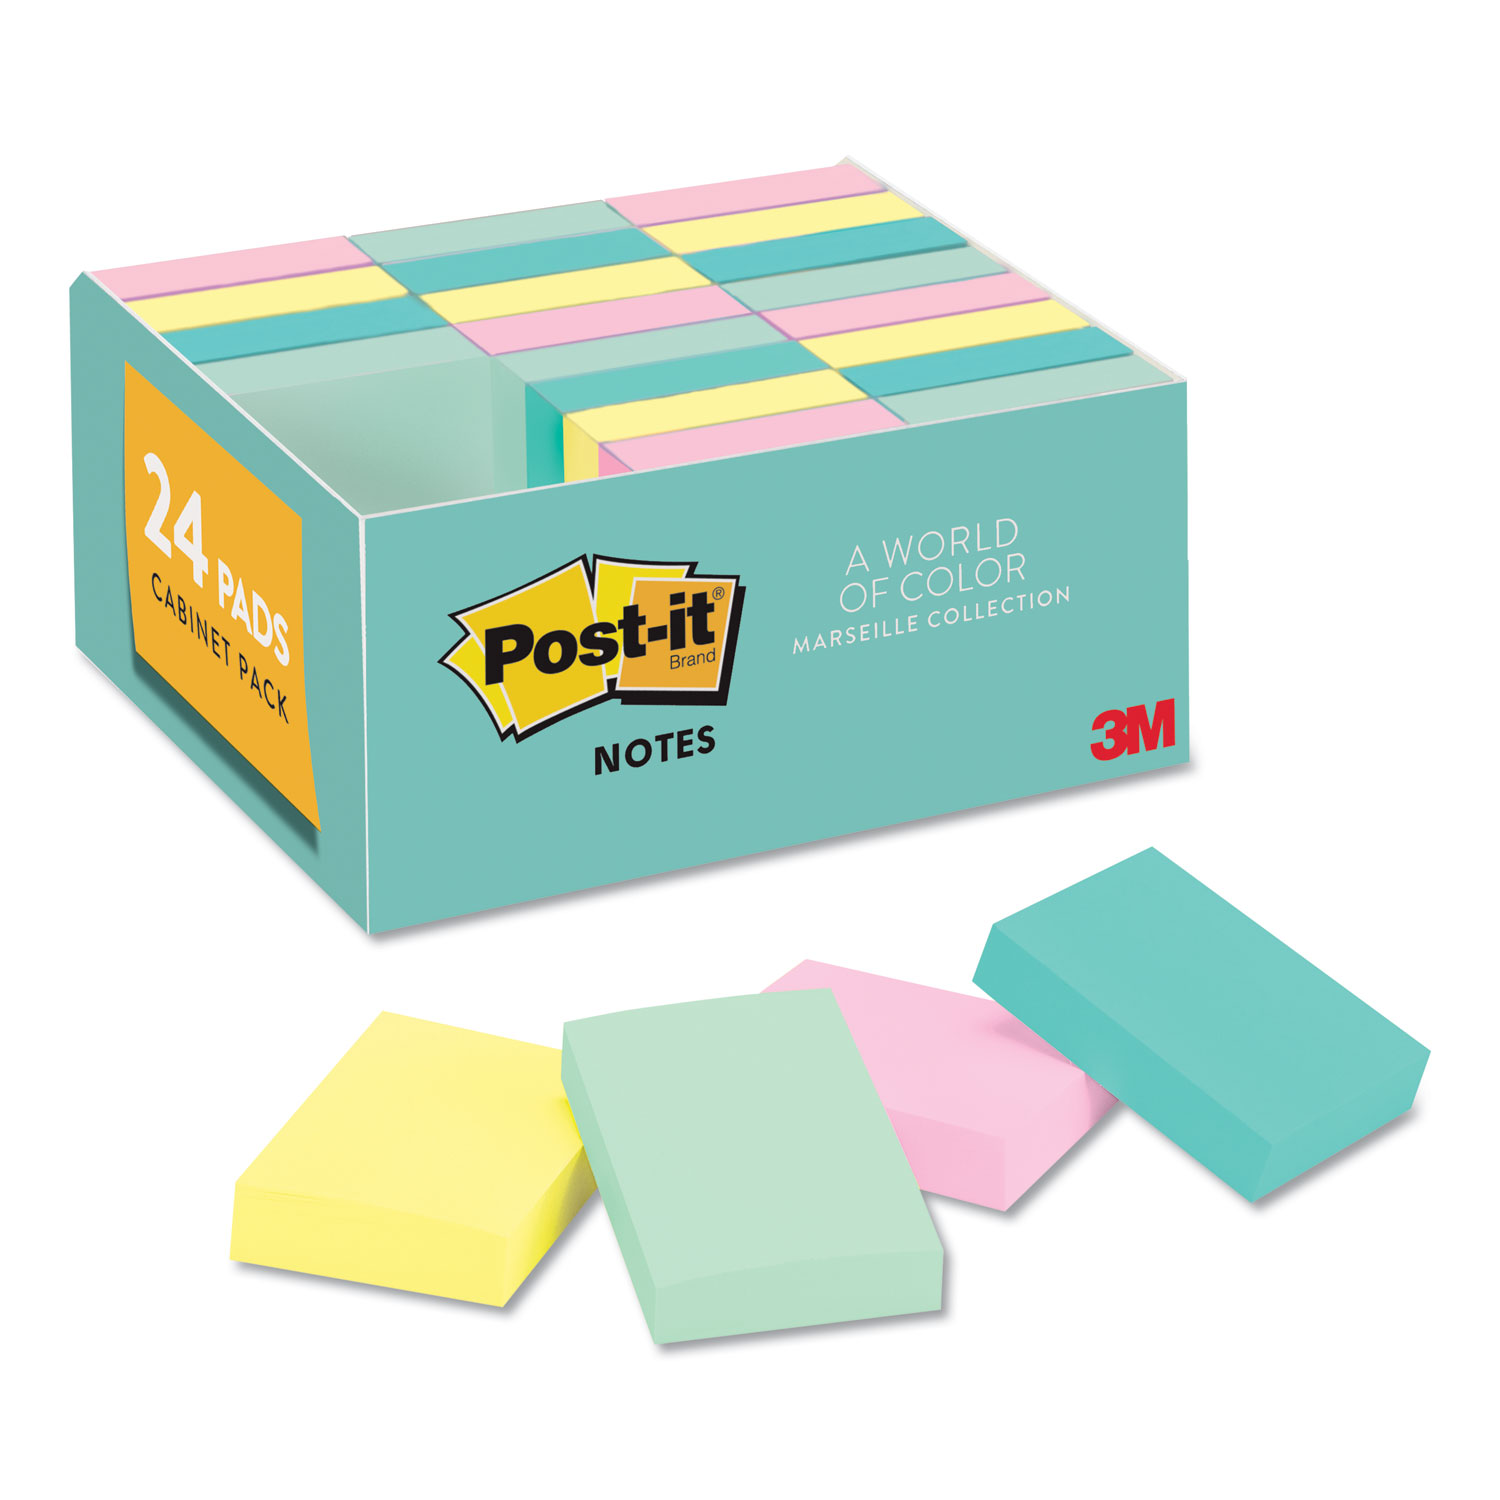  Post-it Notes 653-24APVAD Original Pads in Marseille Colors, Value Pack, 1 3/8 x 1 7/8, 100-Sheet, 24/Pack (MMM65324APVAD) 